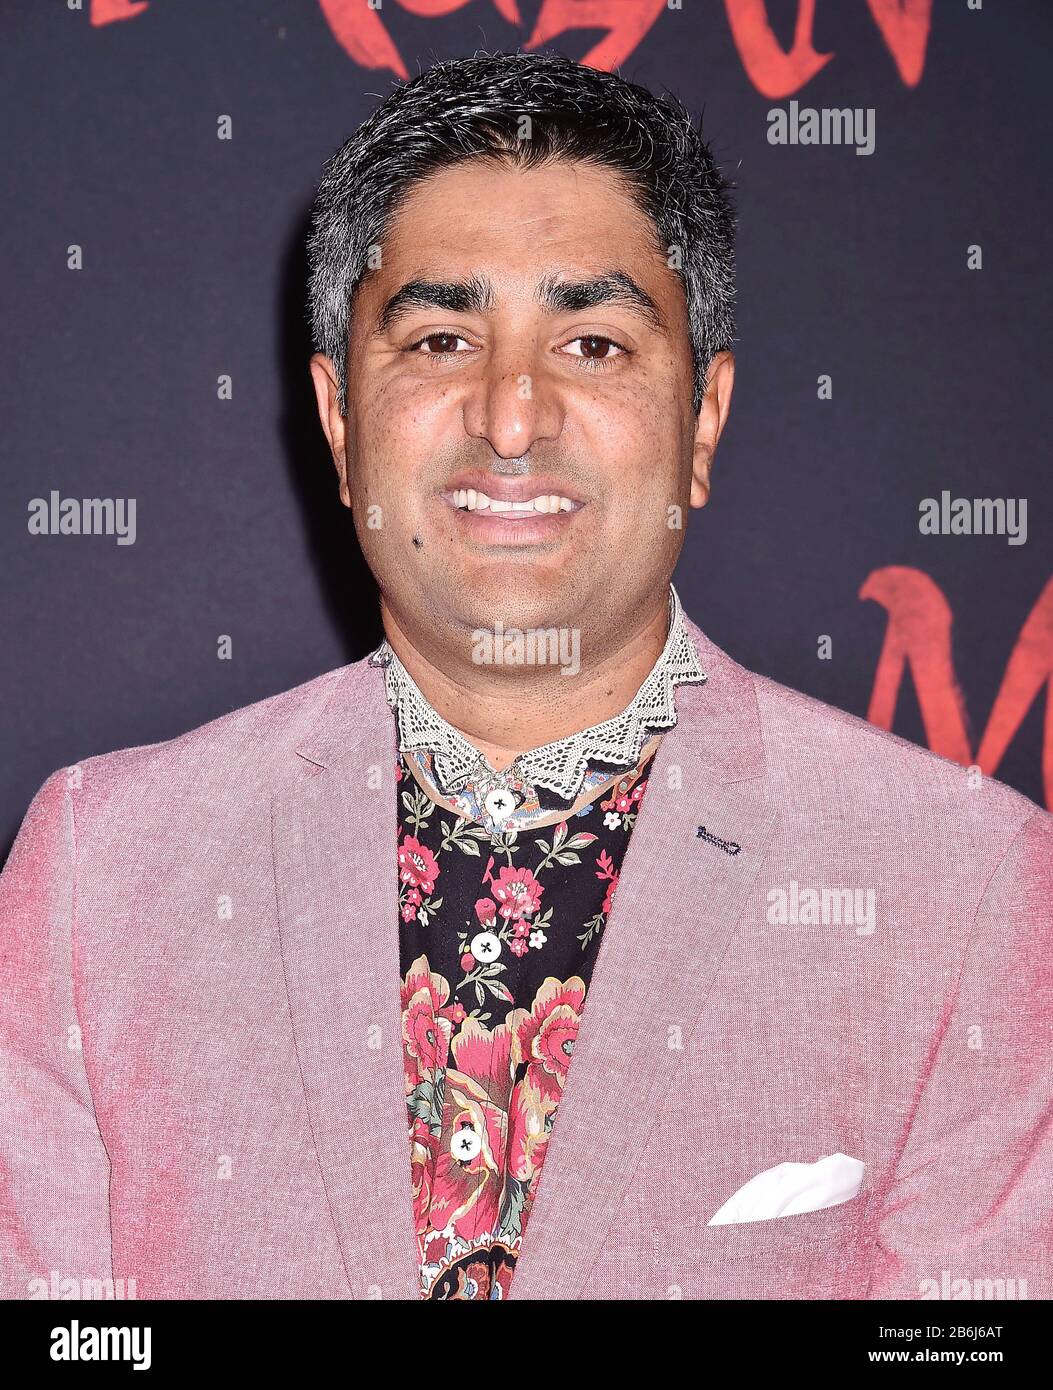 HOLLYWOOD, CA - MARCH 09: Chum Ehelepola attends the premiere of Disney's 'Mulan' at the El Capitan Theatre on March 09, 2020 in Hollywood, California. Stock Photo